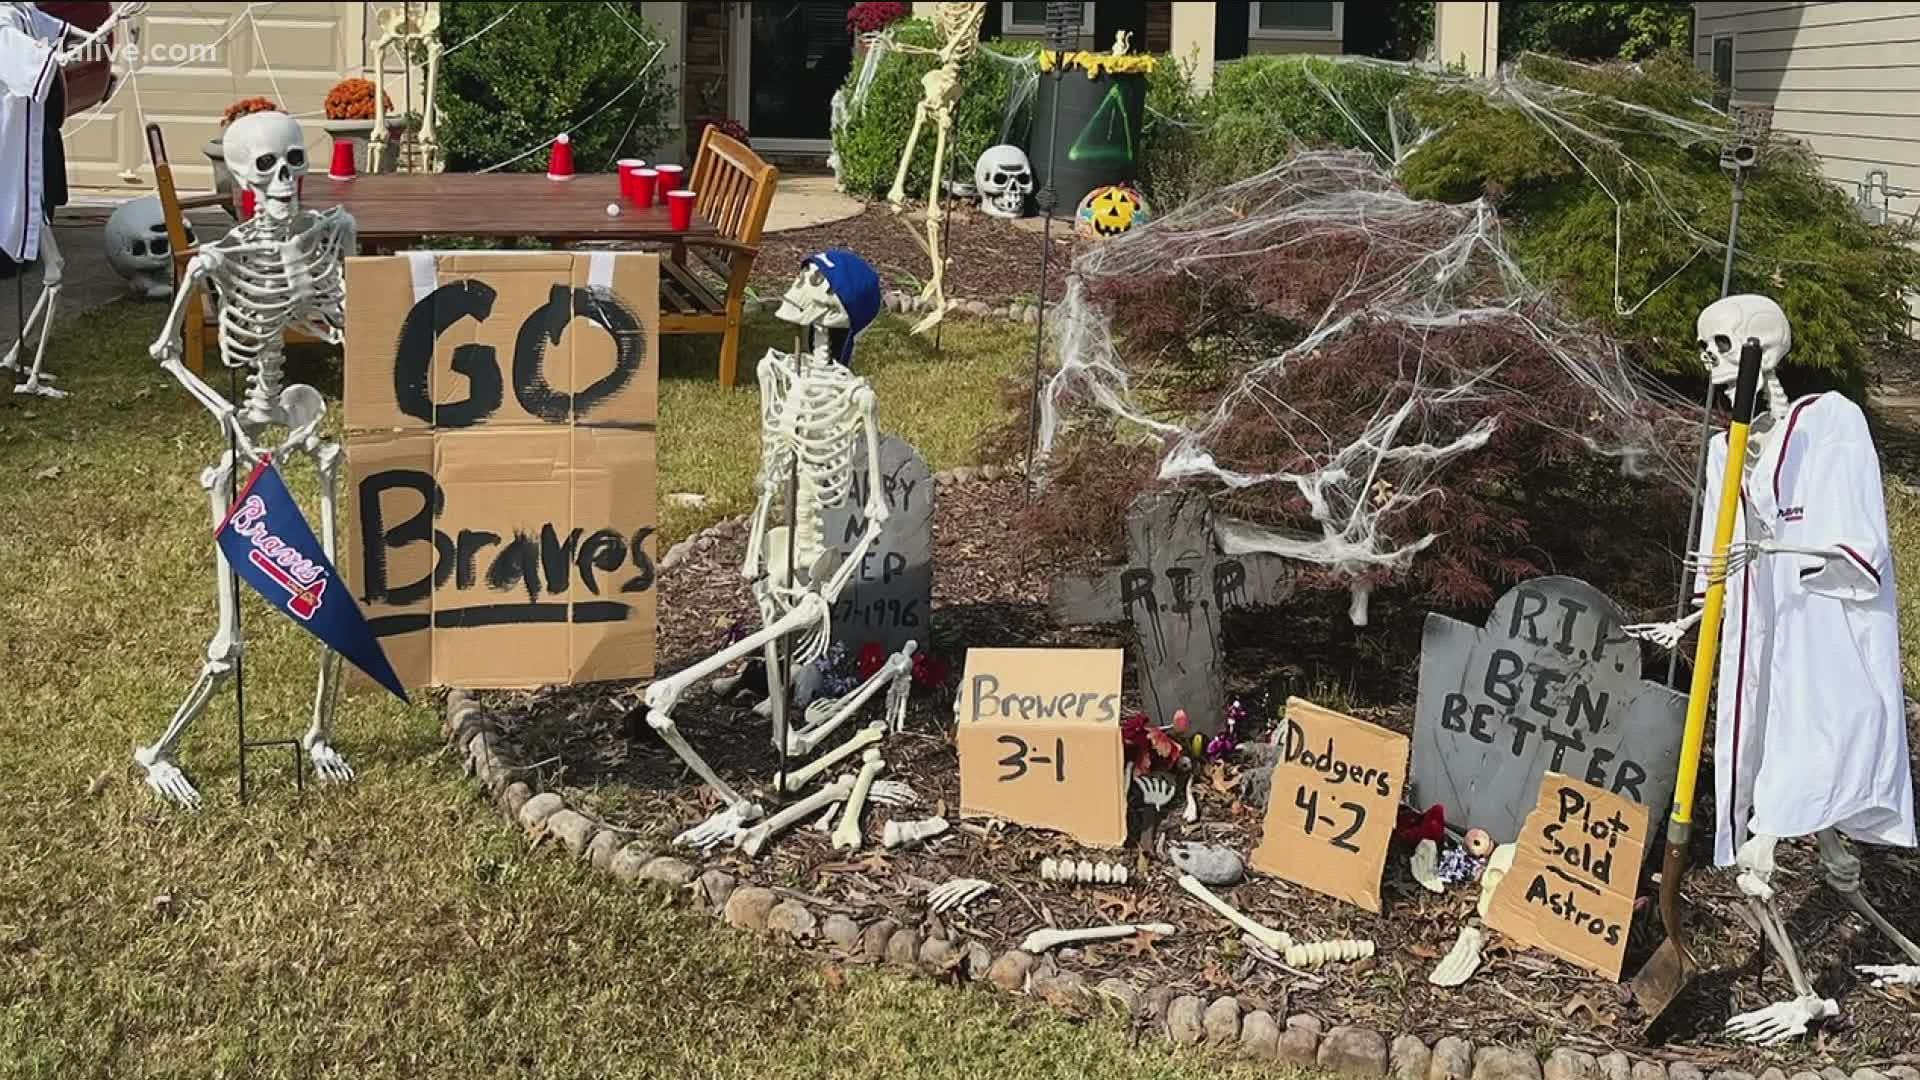 One Braves fan is using his home's Halloween decorations to cheer on Atlanta ahead of the World Series.